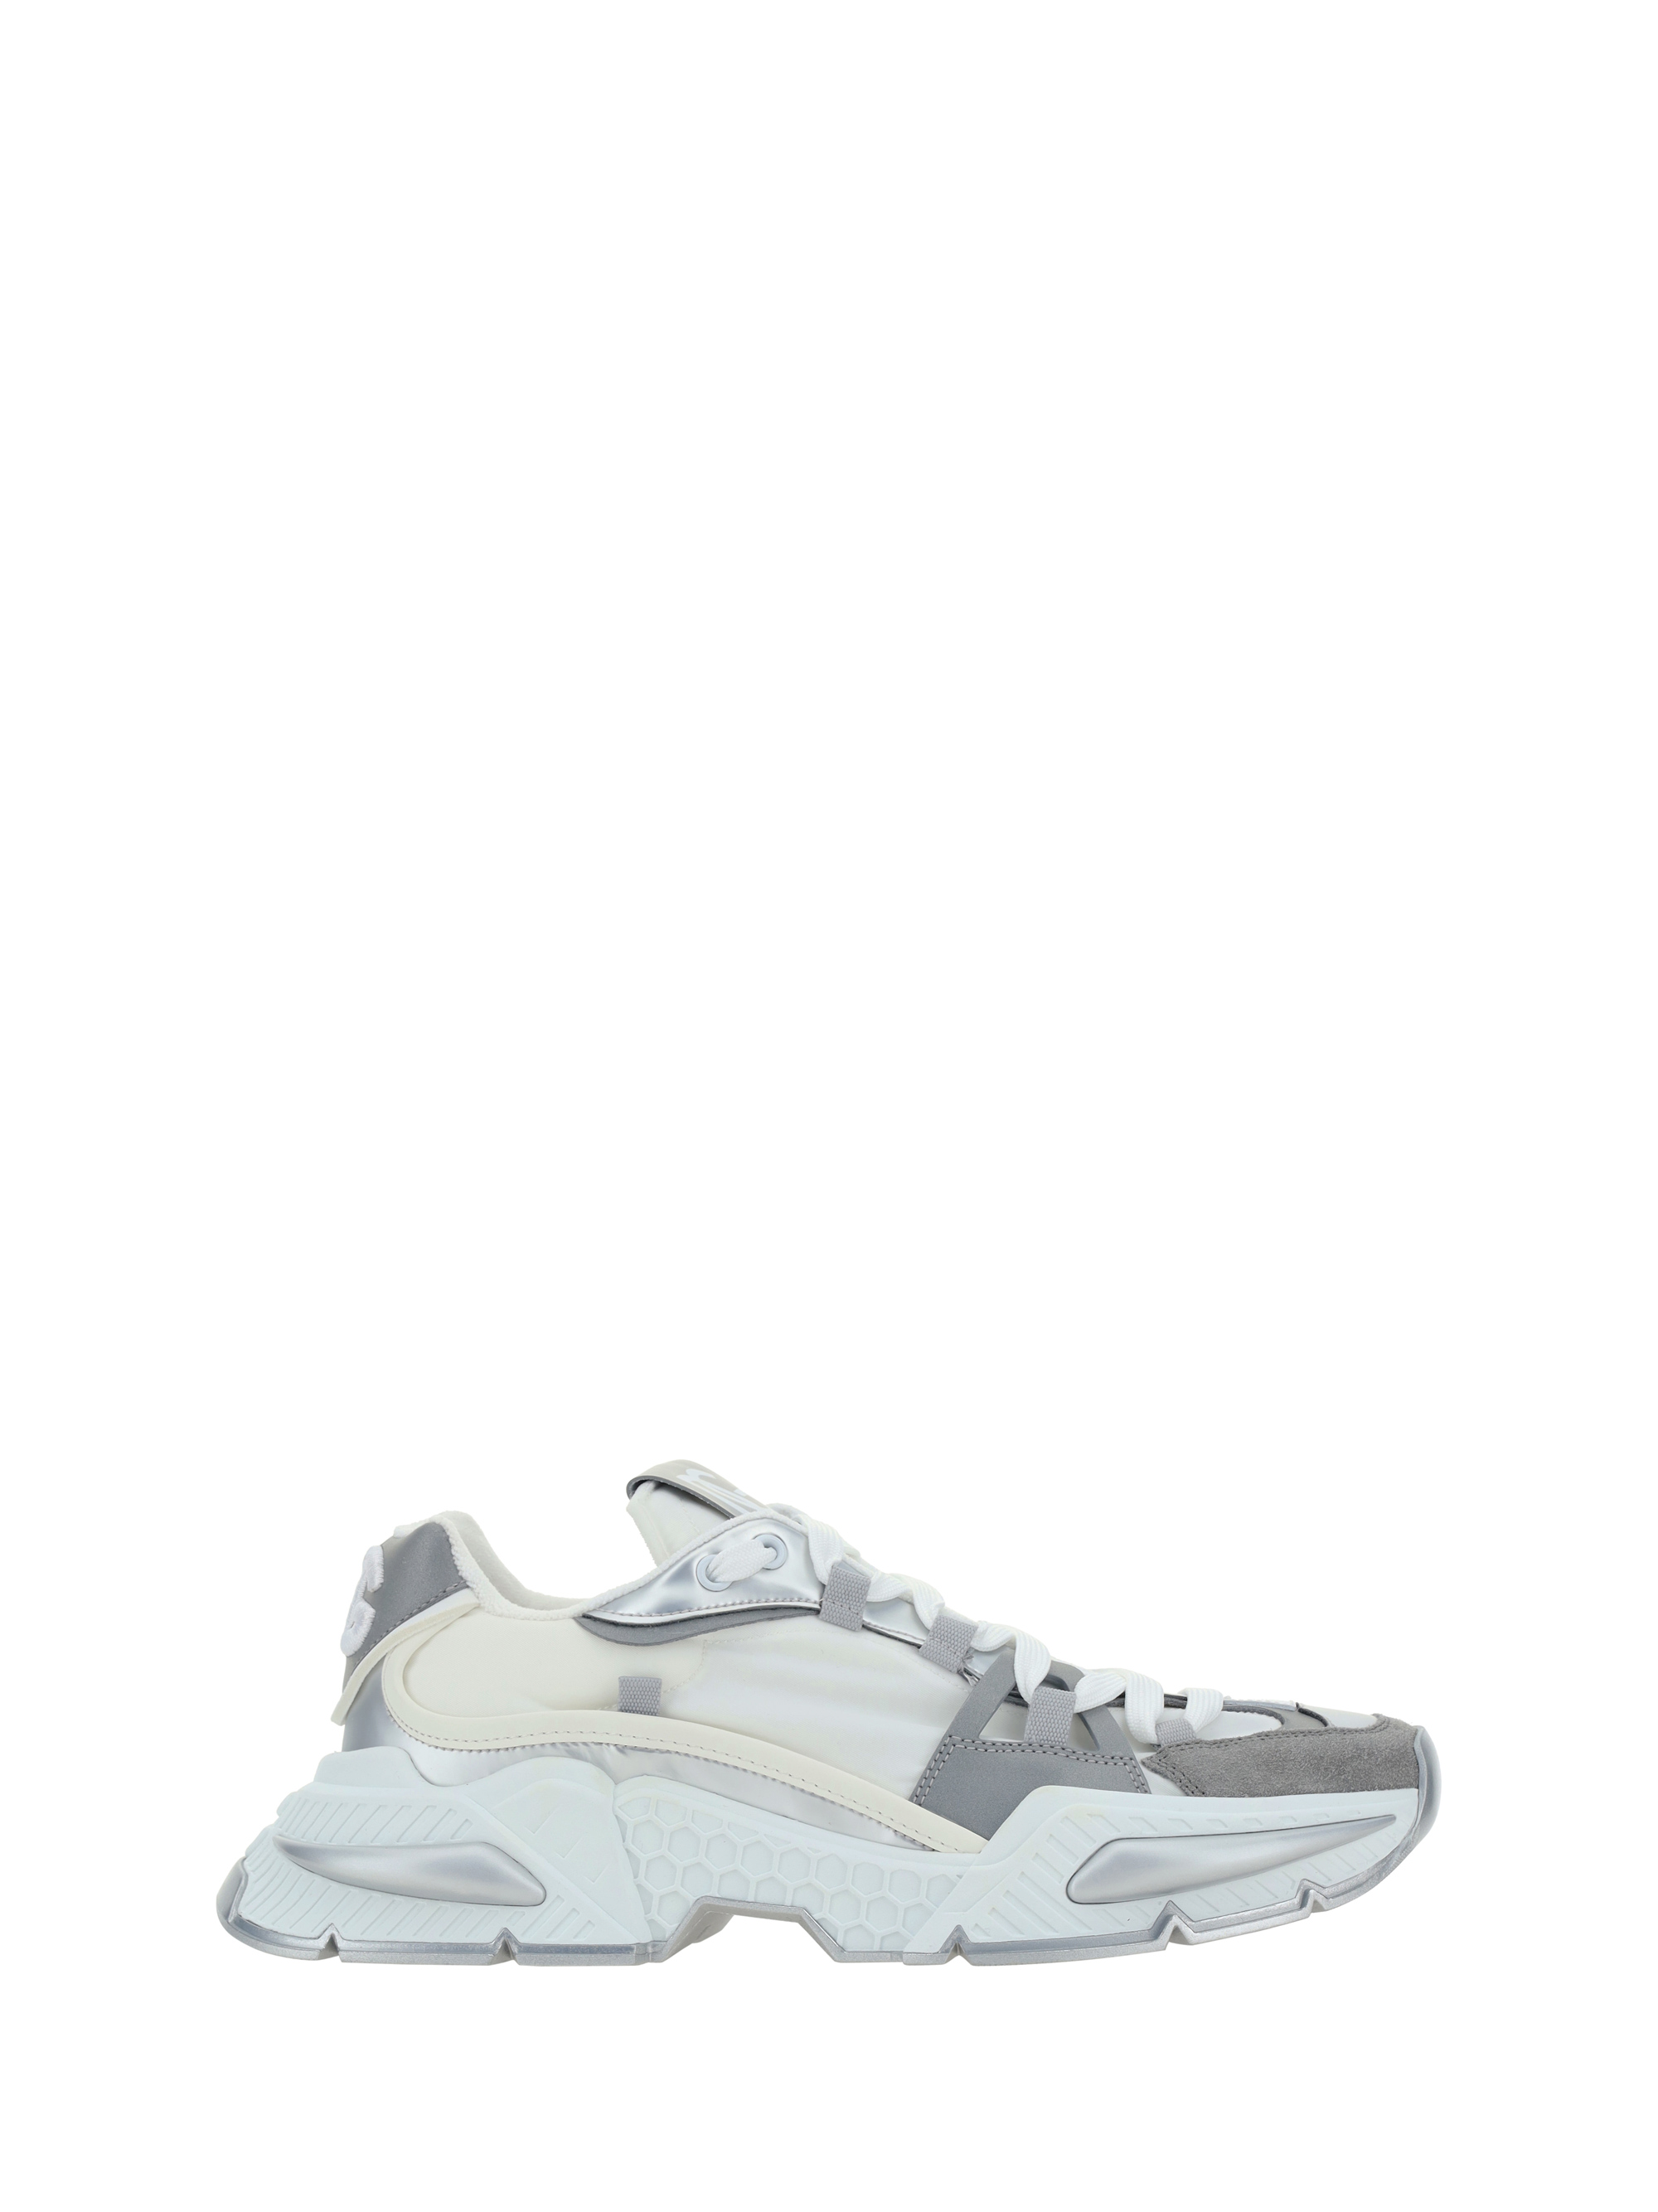 Dolce & Gabbana Trainers In Argento/bianco